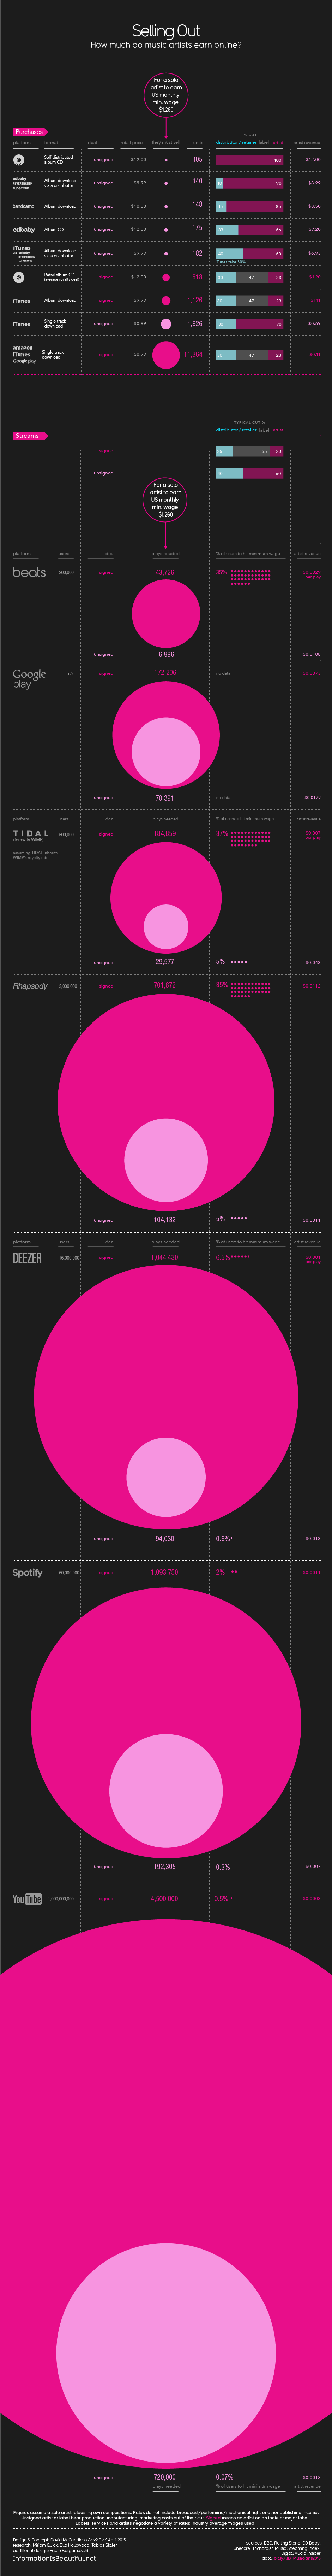 Spotify Infographic